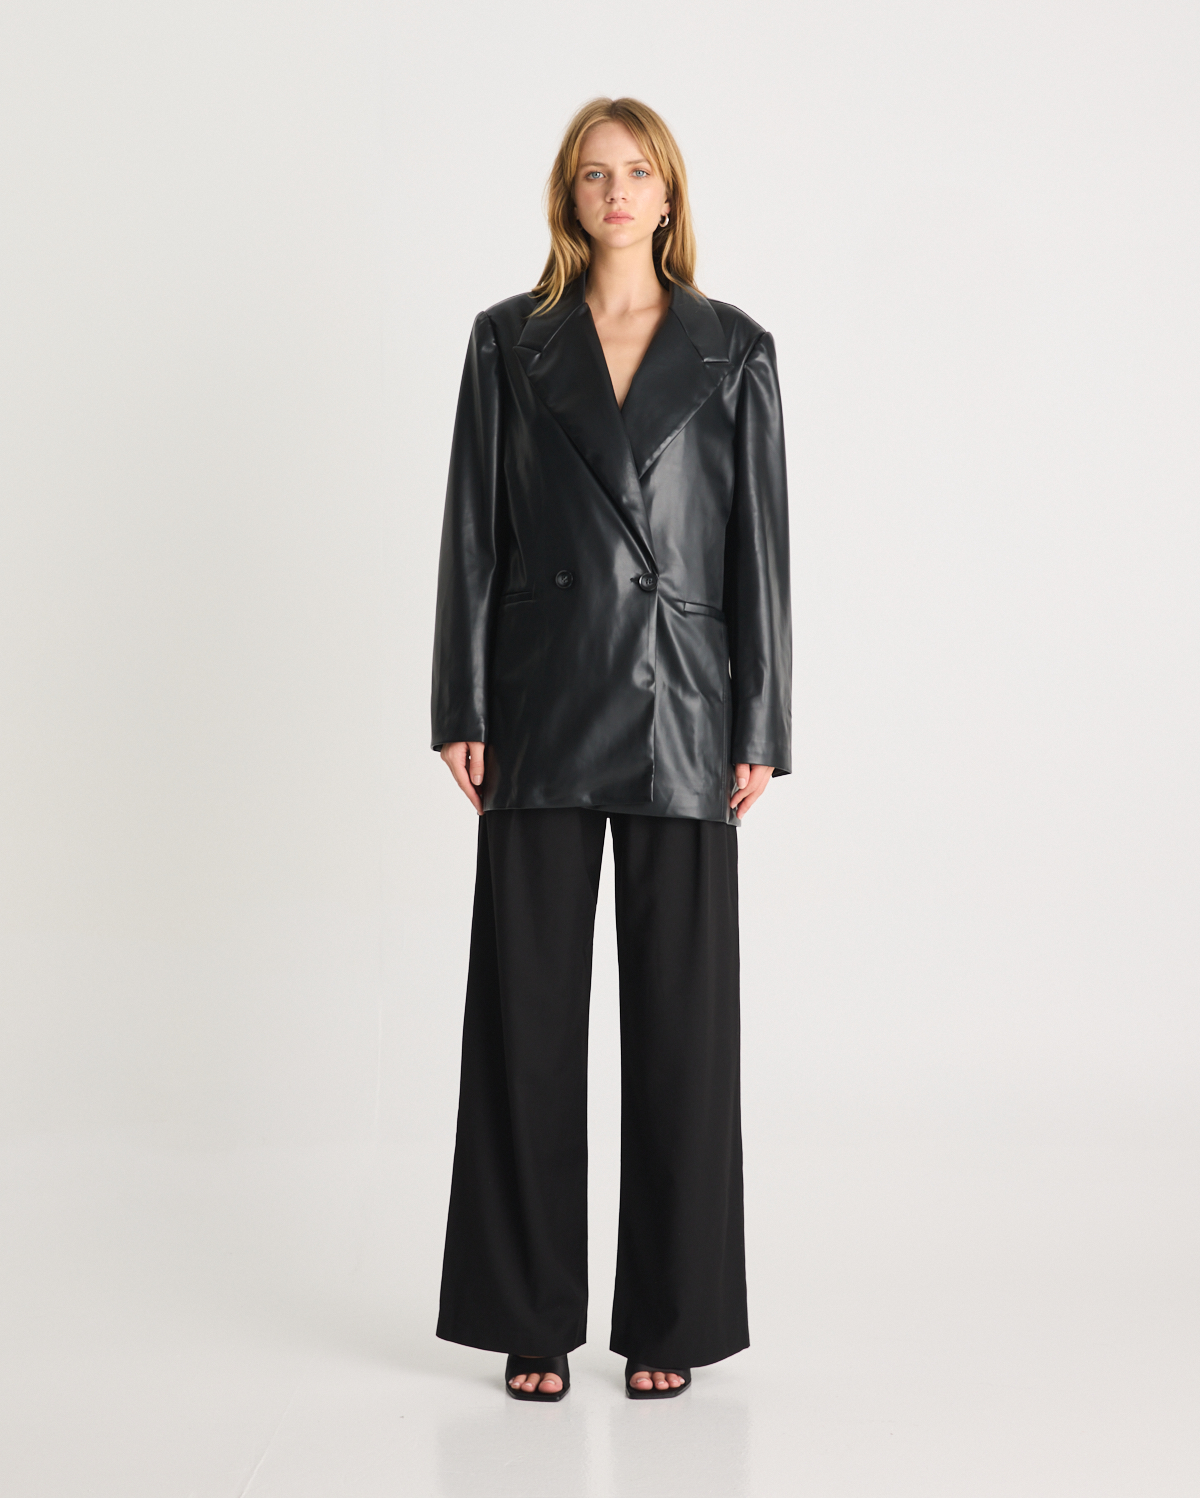 The Vegan Leather Boxy Blazer is a relaxed, oversized silhouette, featuring front pockets and a button closure. It is fully lined and is crafted from a buttery soft Vegan leather fabrication in Black. Now available at Romy. 